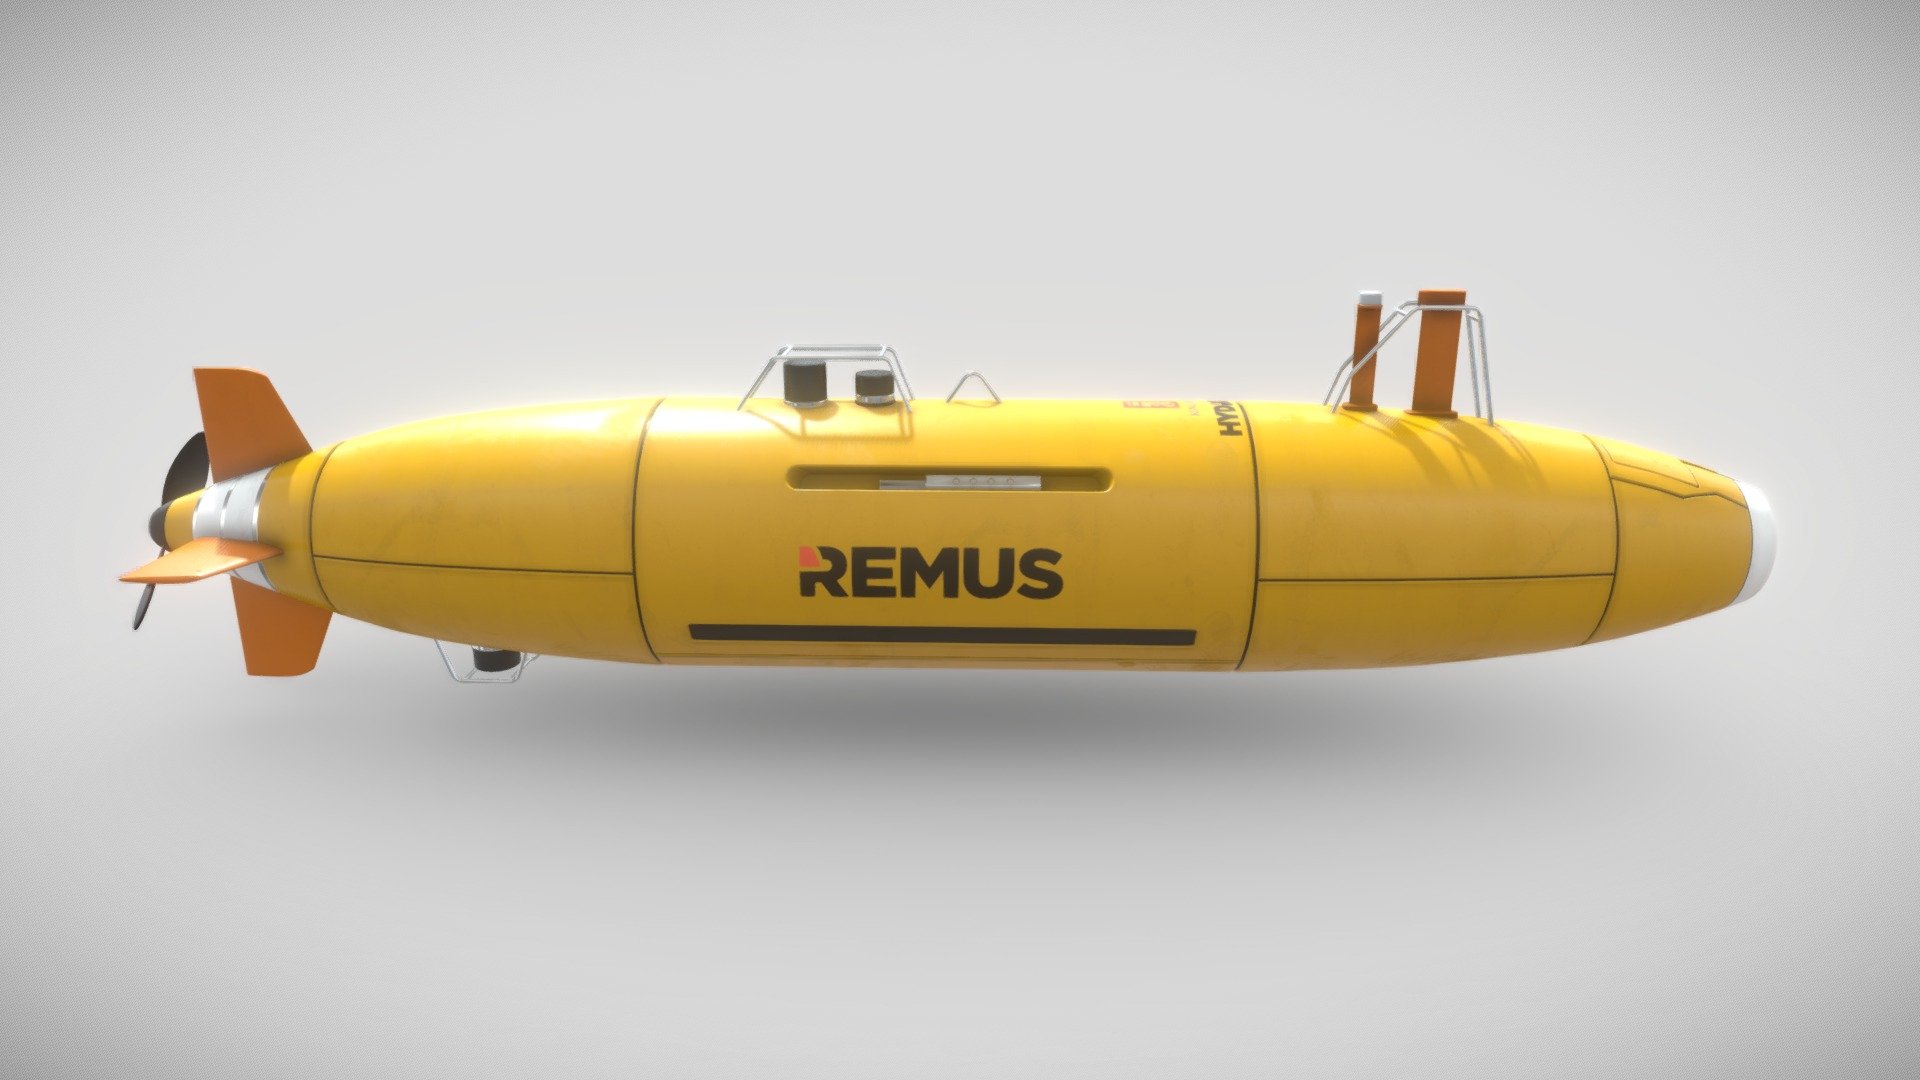 The Remus 6000 is a AUV developed by Kongsberg 3d model